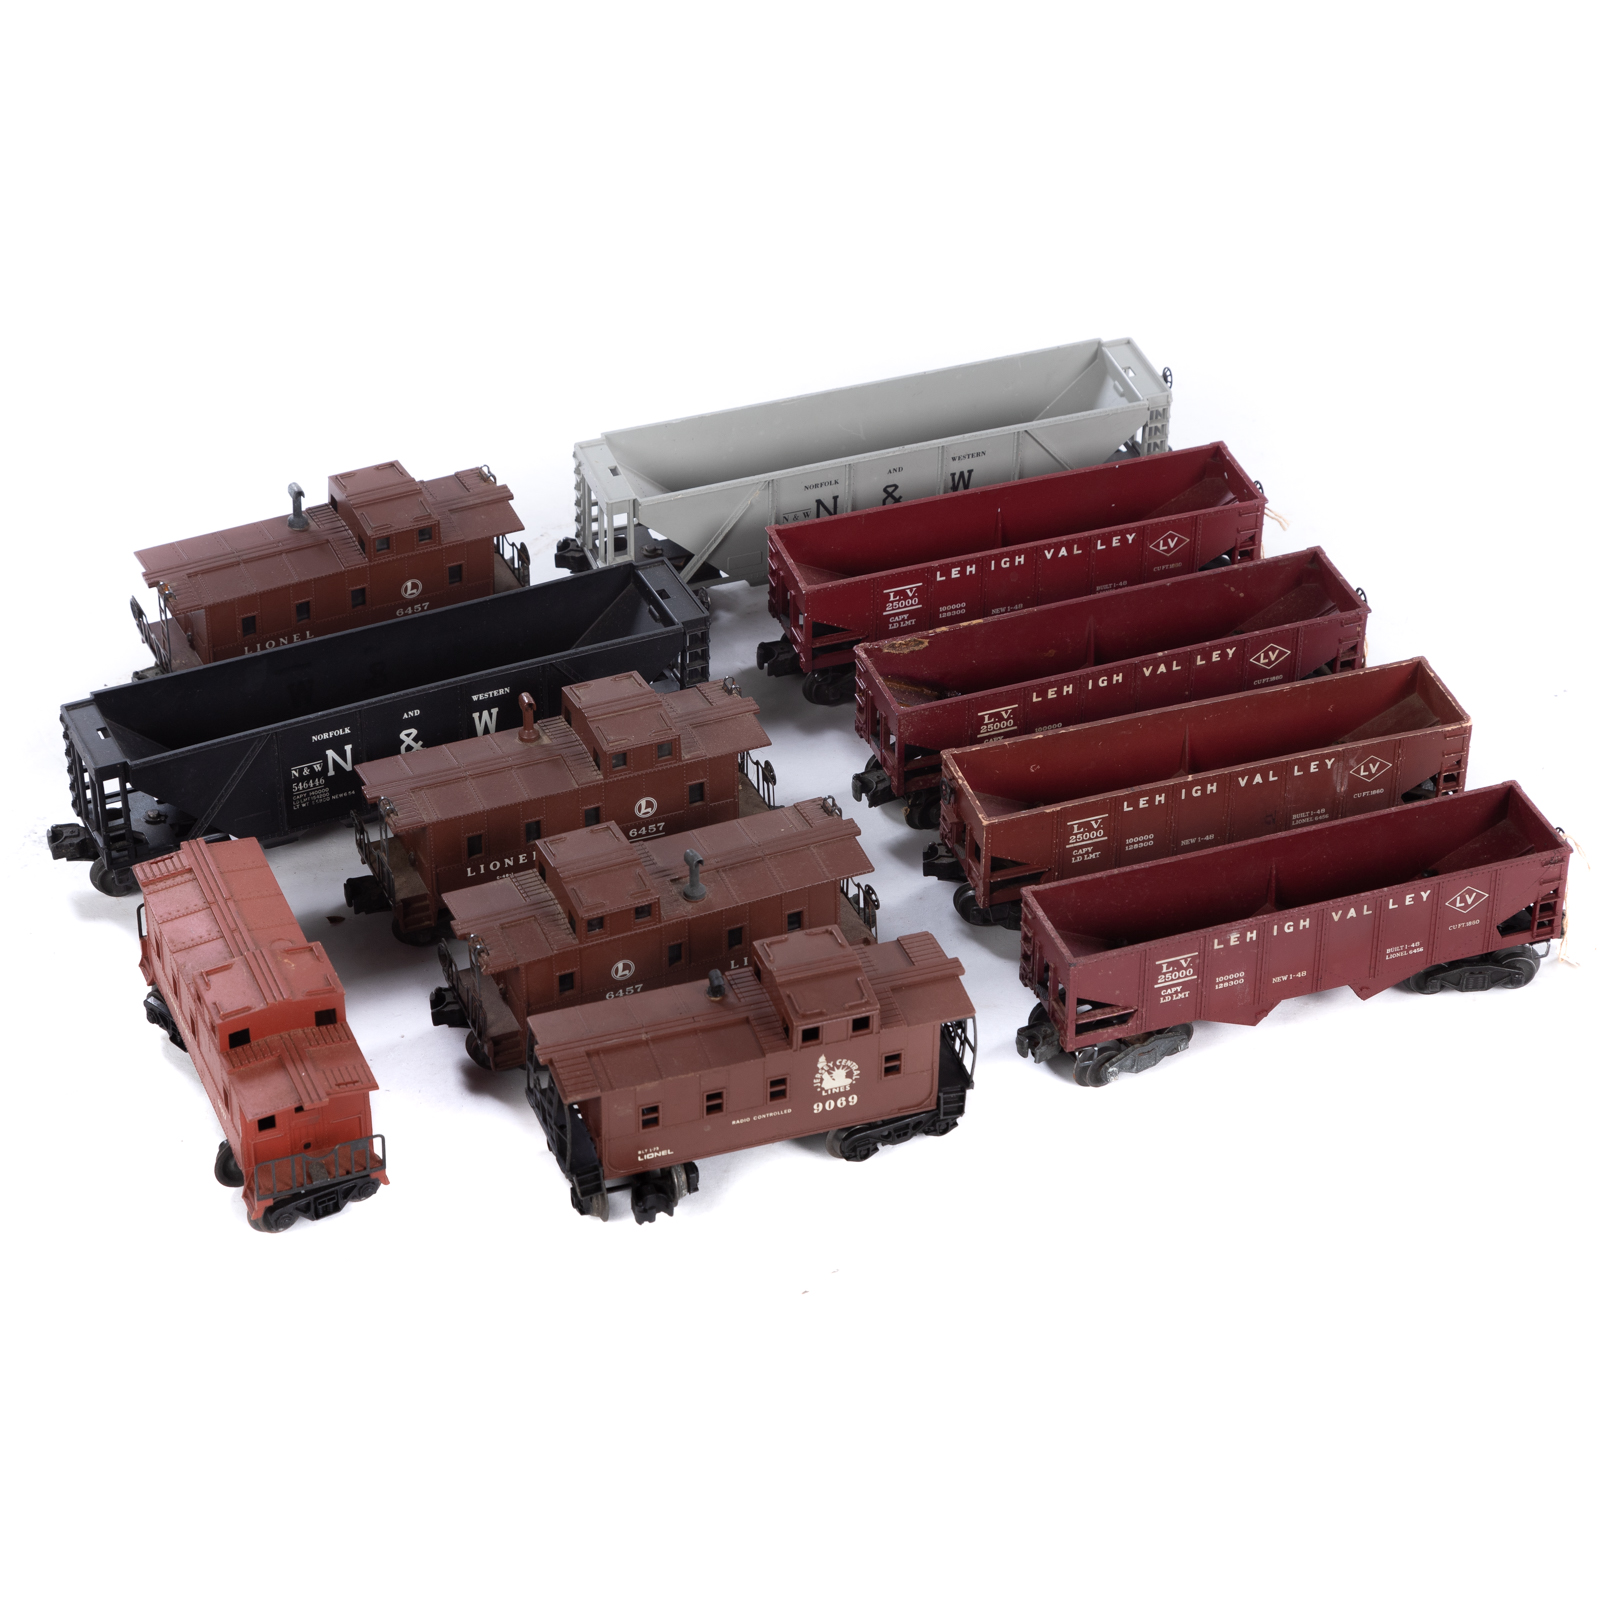 11 ASSORTED LIONEL FREIGHT CARS 36a155